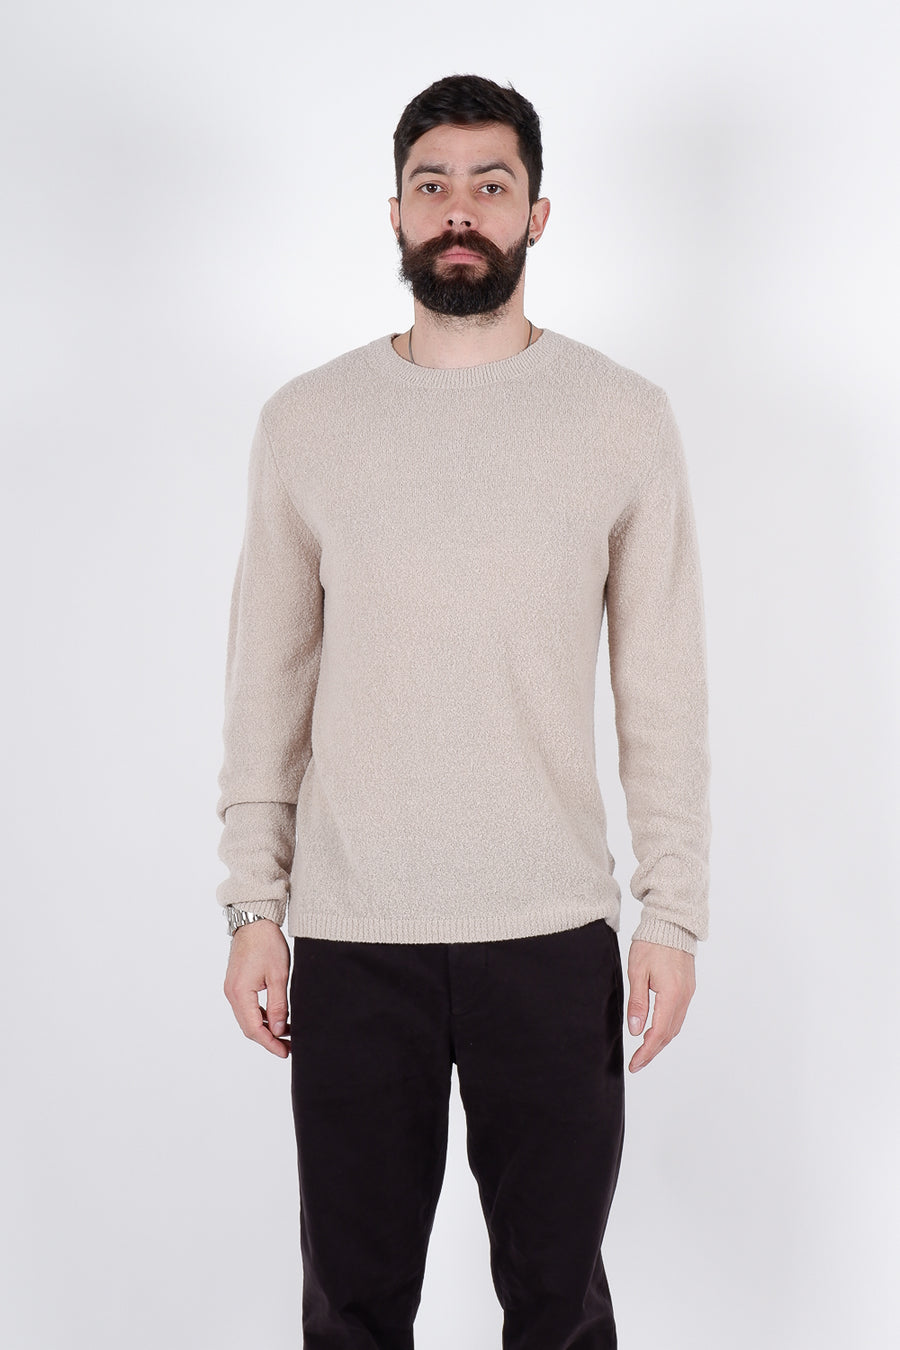 Buy the Daniele Fiesoli Boiled Wool Round Neck Sweater Taupe at Intro. Spend £50 for free UK delivery. Official stockists. We ship worldwide.